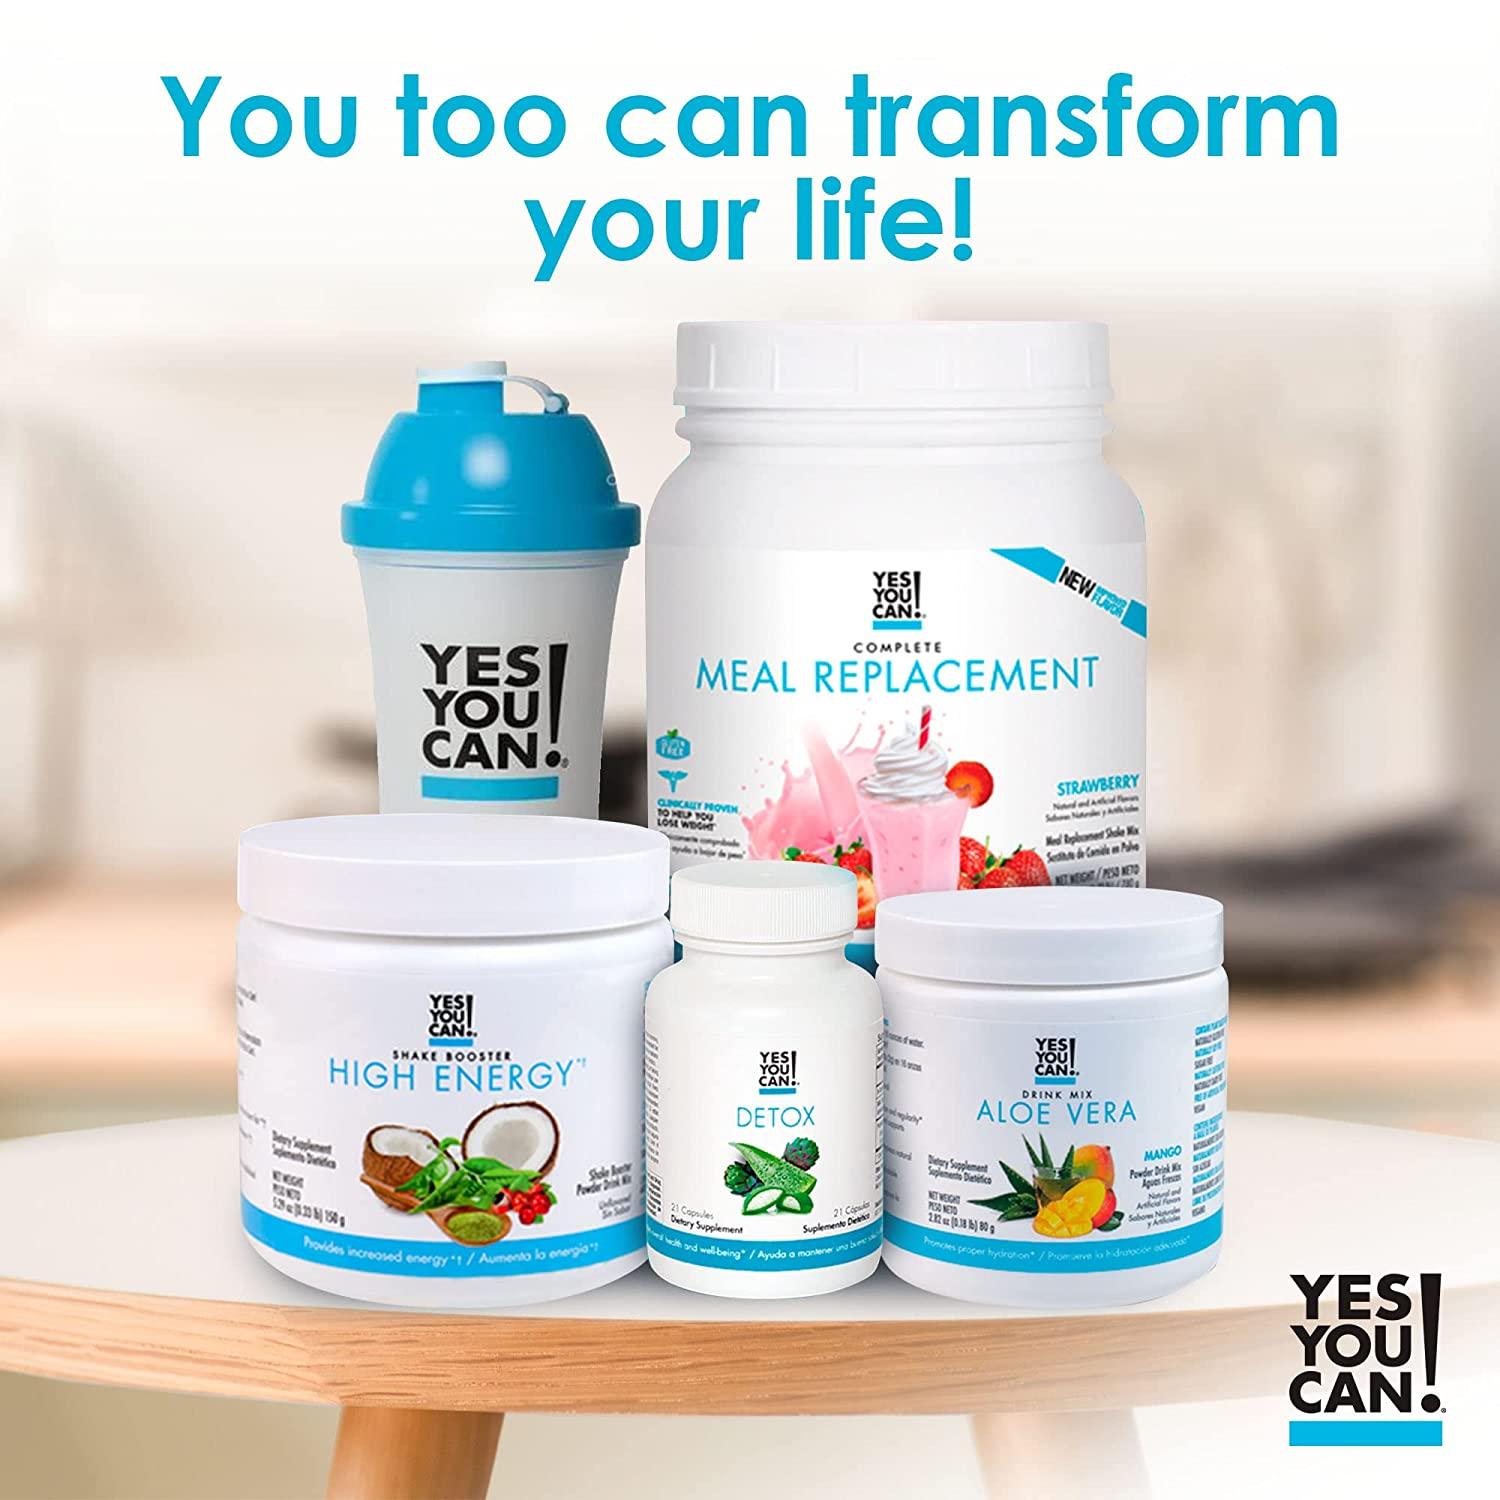 Yes You Can! Detox Plus Kit (Meal Replacement Vanilla, Aloe Vera Pineapple)  - Complete Meal Replacement Powder, High Energy Shake Booster, Aloe Vera  Detox Supplement, Health Transformation Aloe Vera Pineapple Meal Replacem…